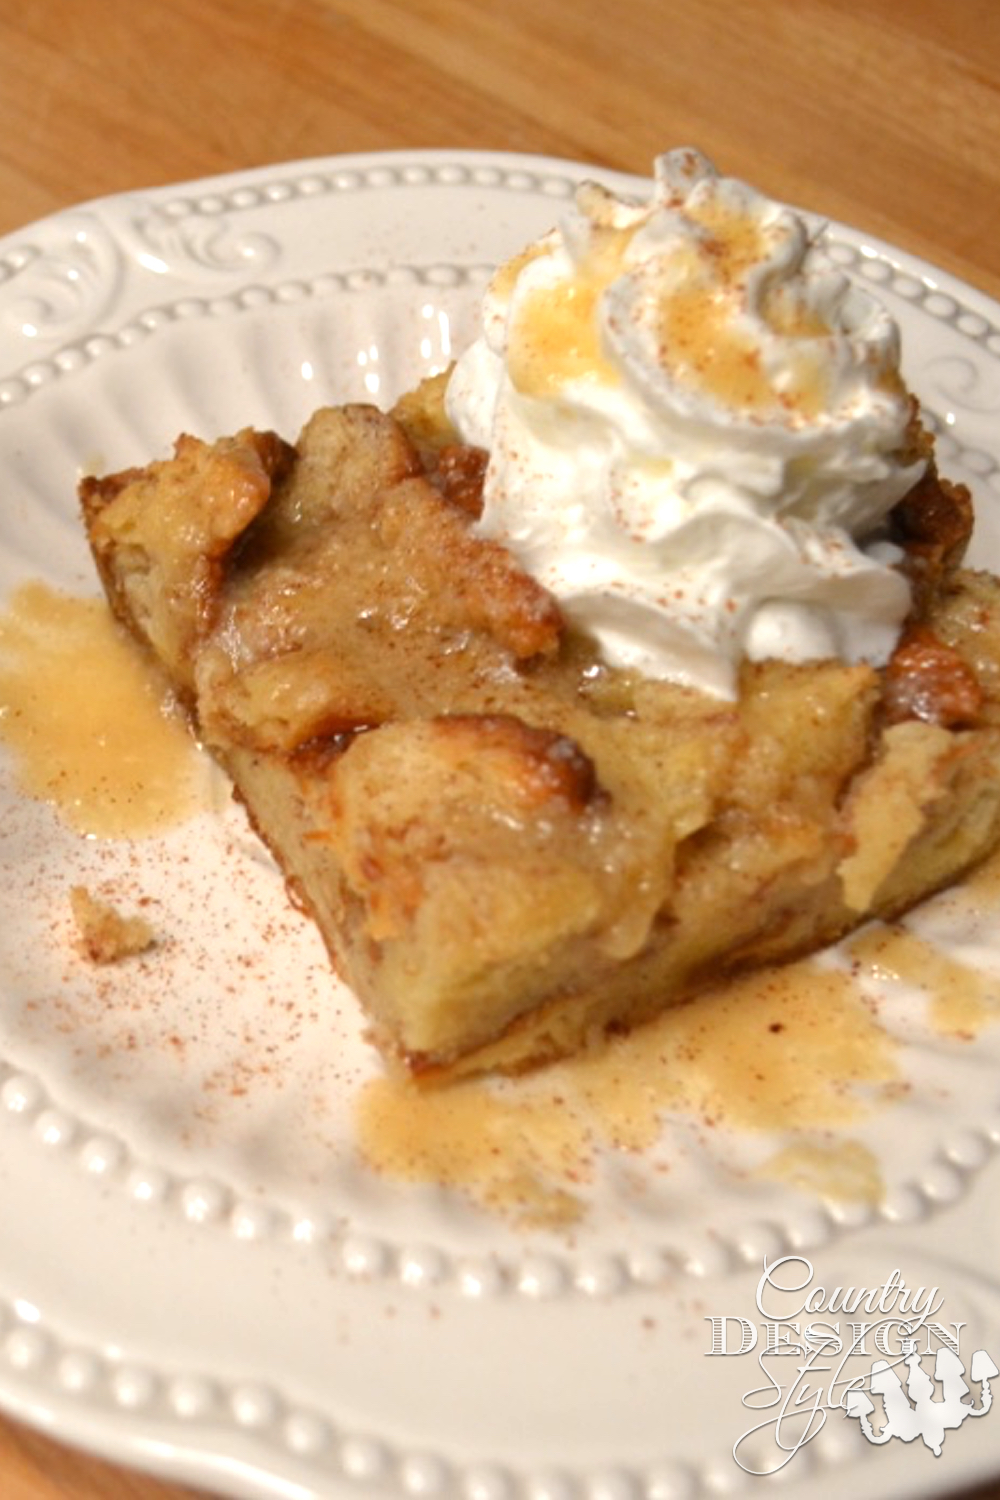 Rumchata Bread Pudding | Country Design Style | countrydesignstyle.com